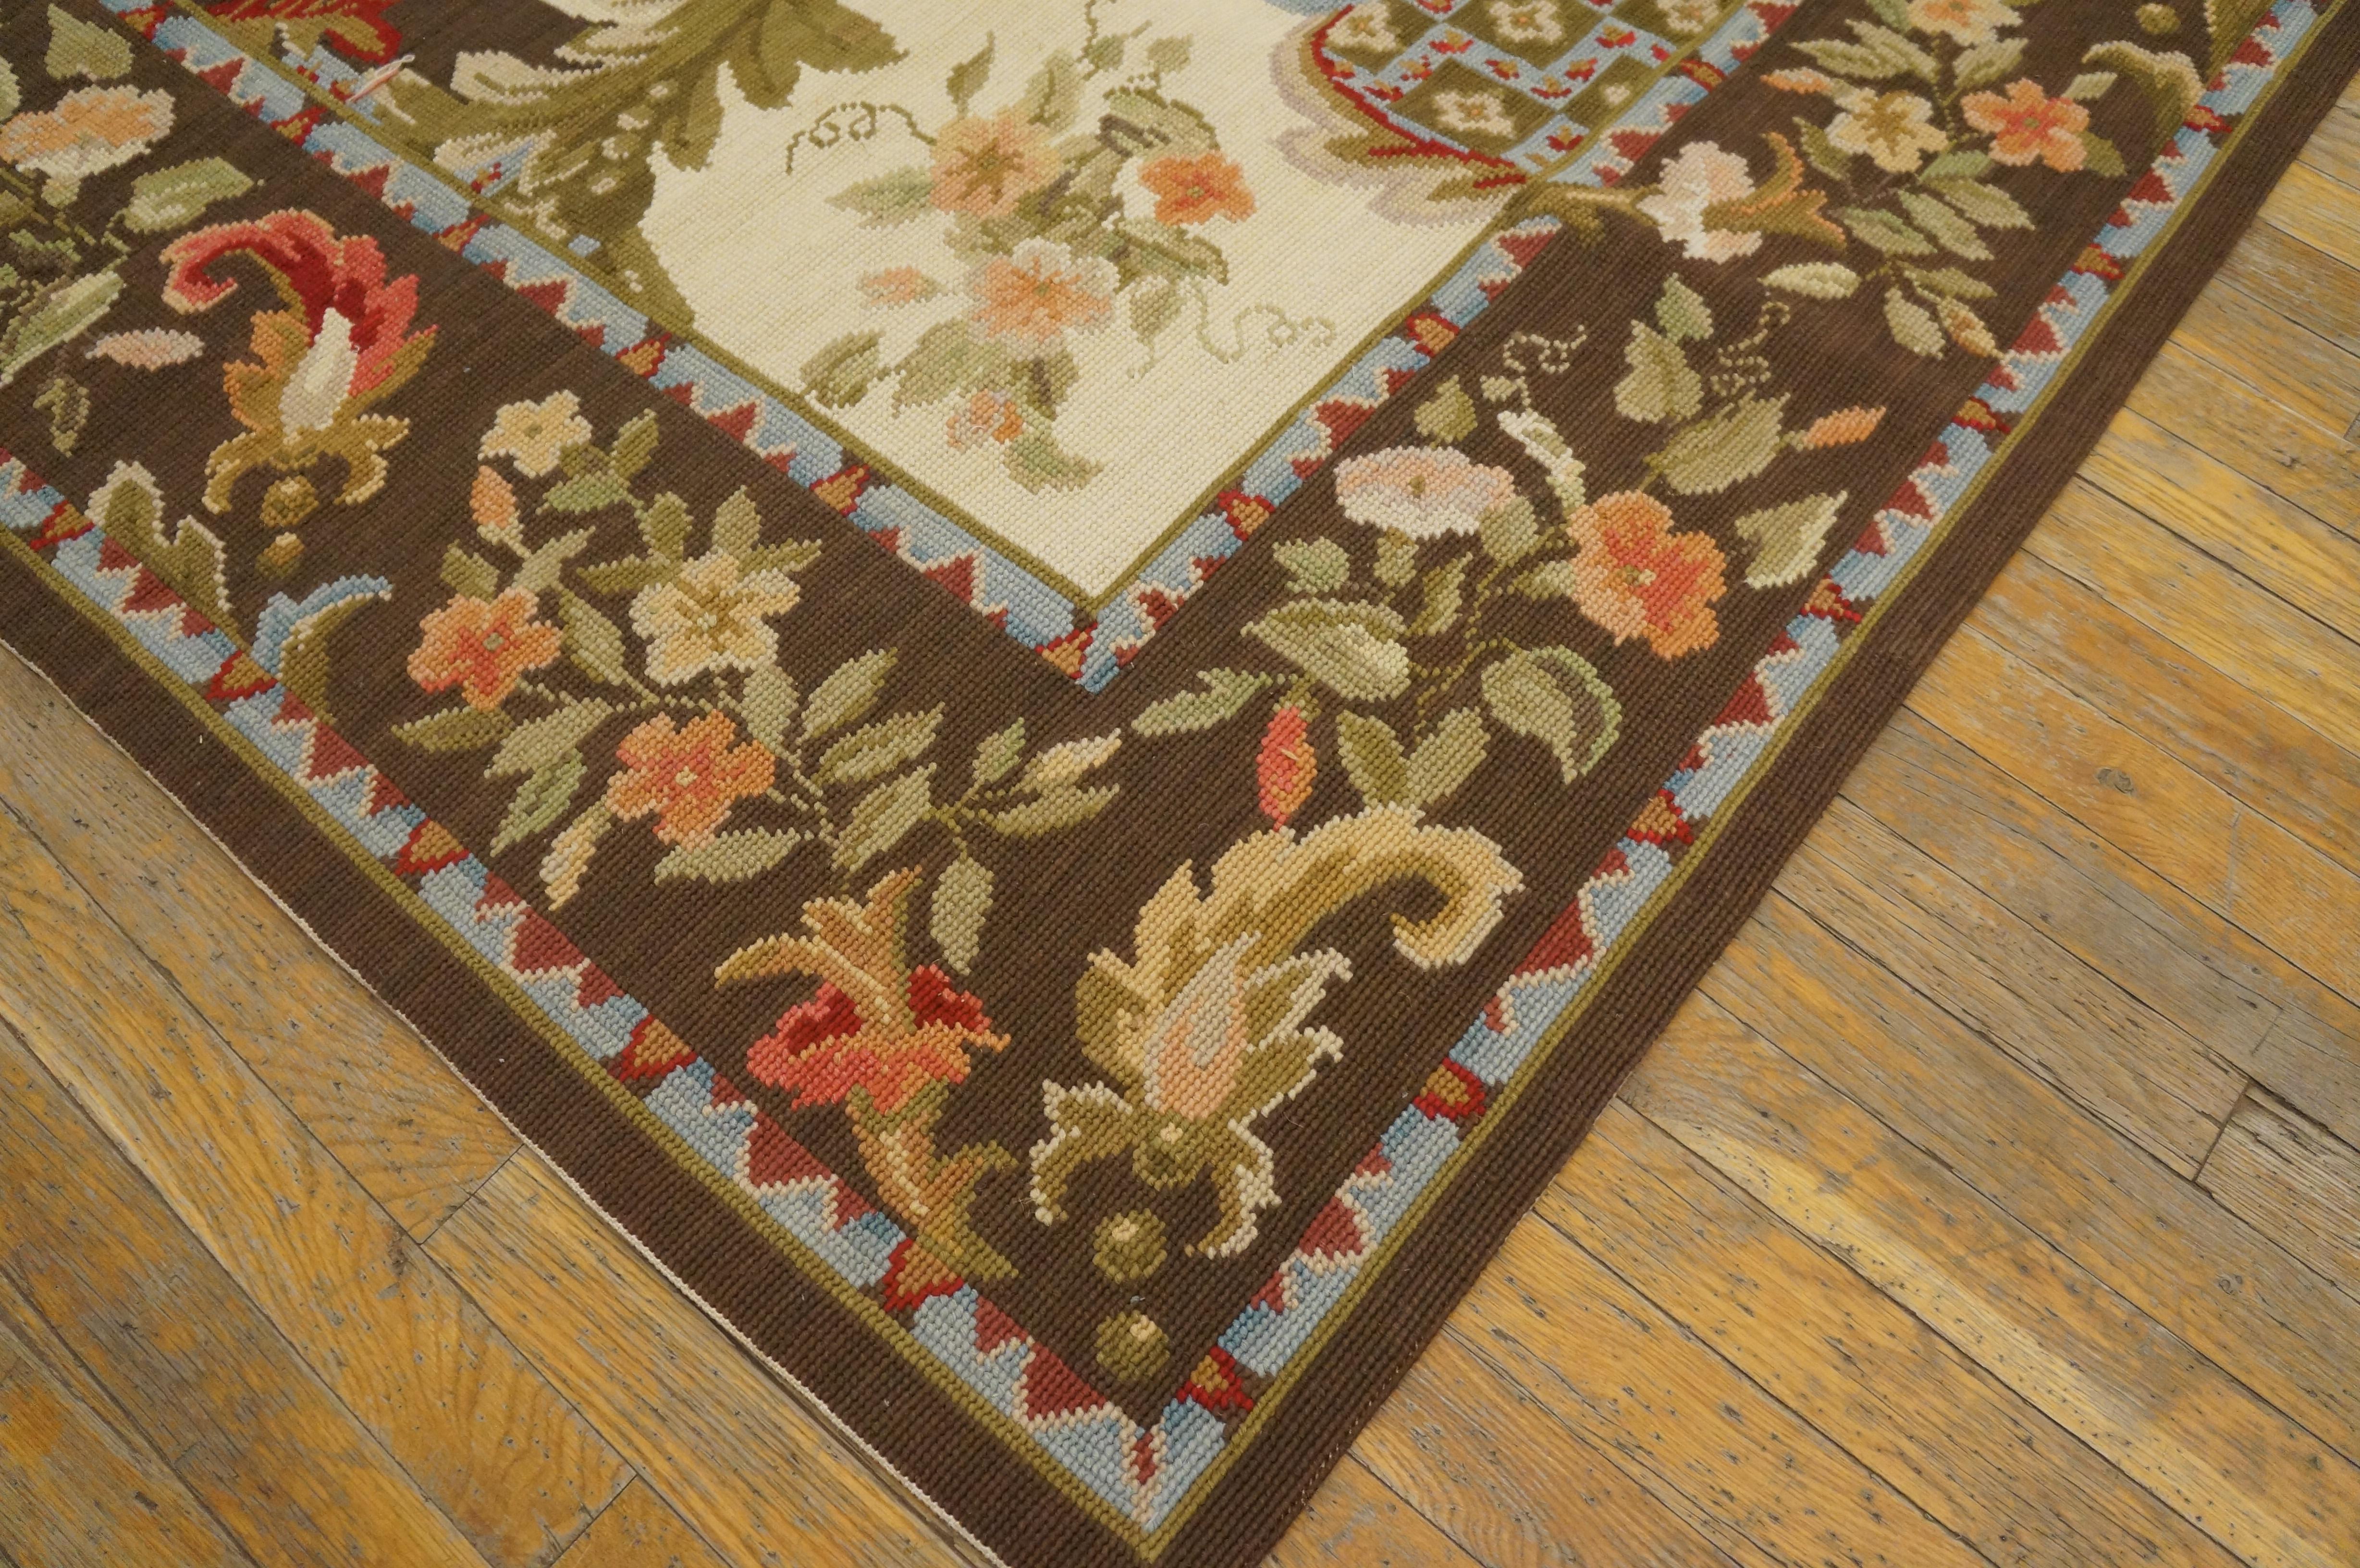 High Victorian Contemperory Needlepoint Carpet ( 9' x 12' - 275 x 365 )  For Sale